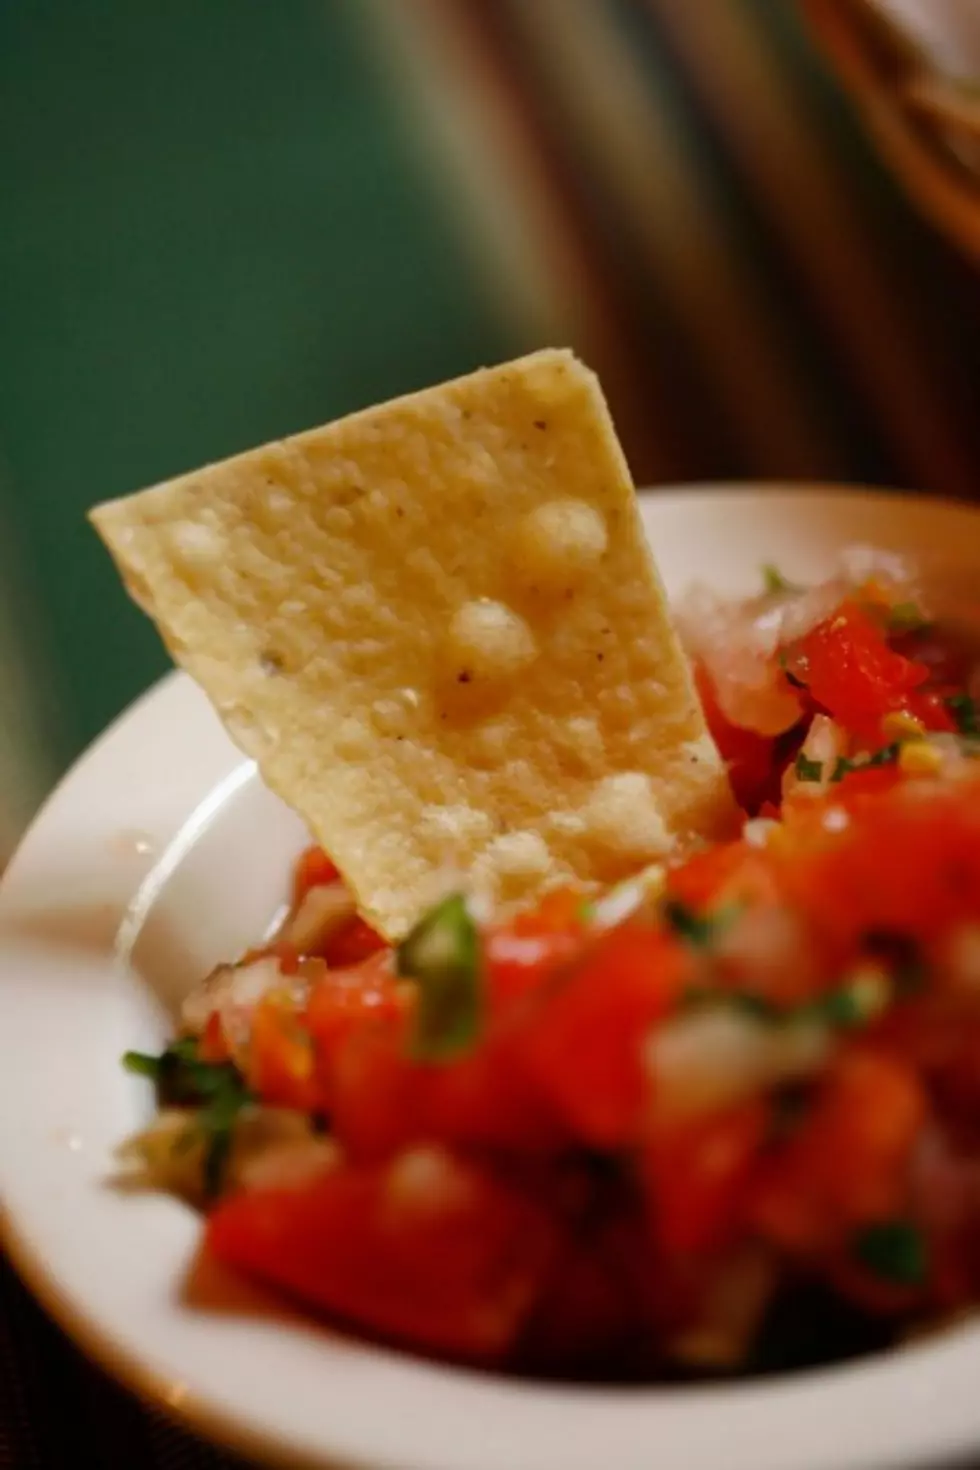 Police Say Women Stabbed Boyfriend For Eating All the Salsa